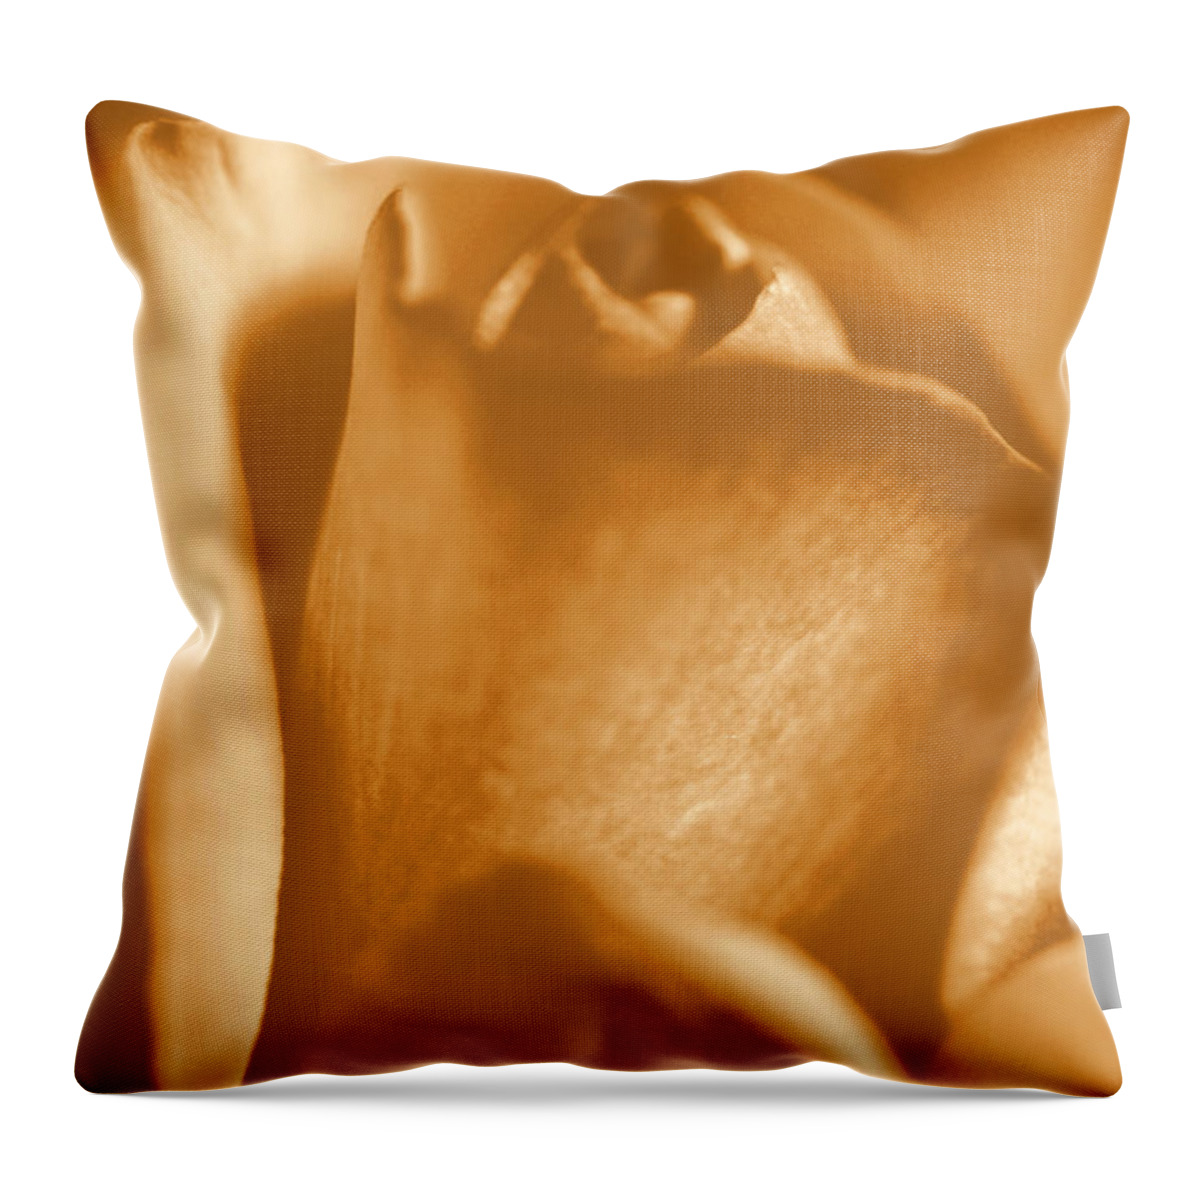 Rose Throw Pillow featuring the photograph Golden Rose Bud by Amy Fose